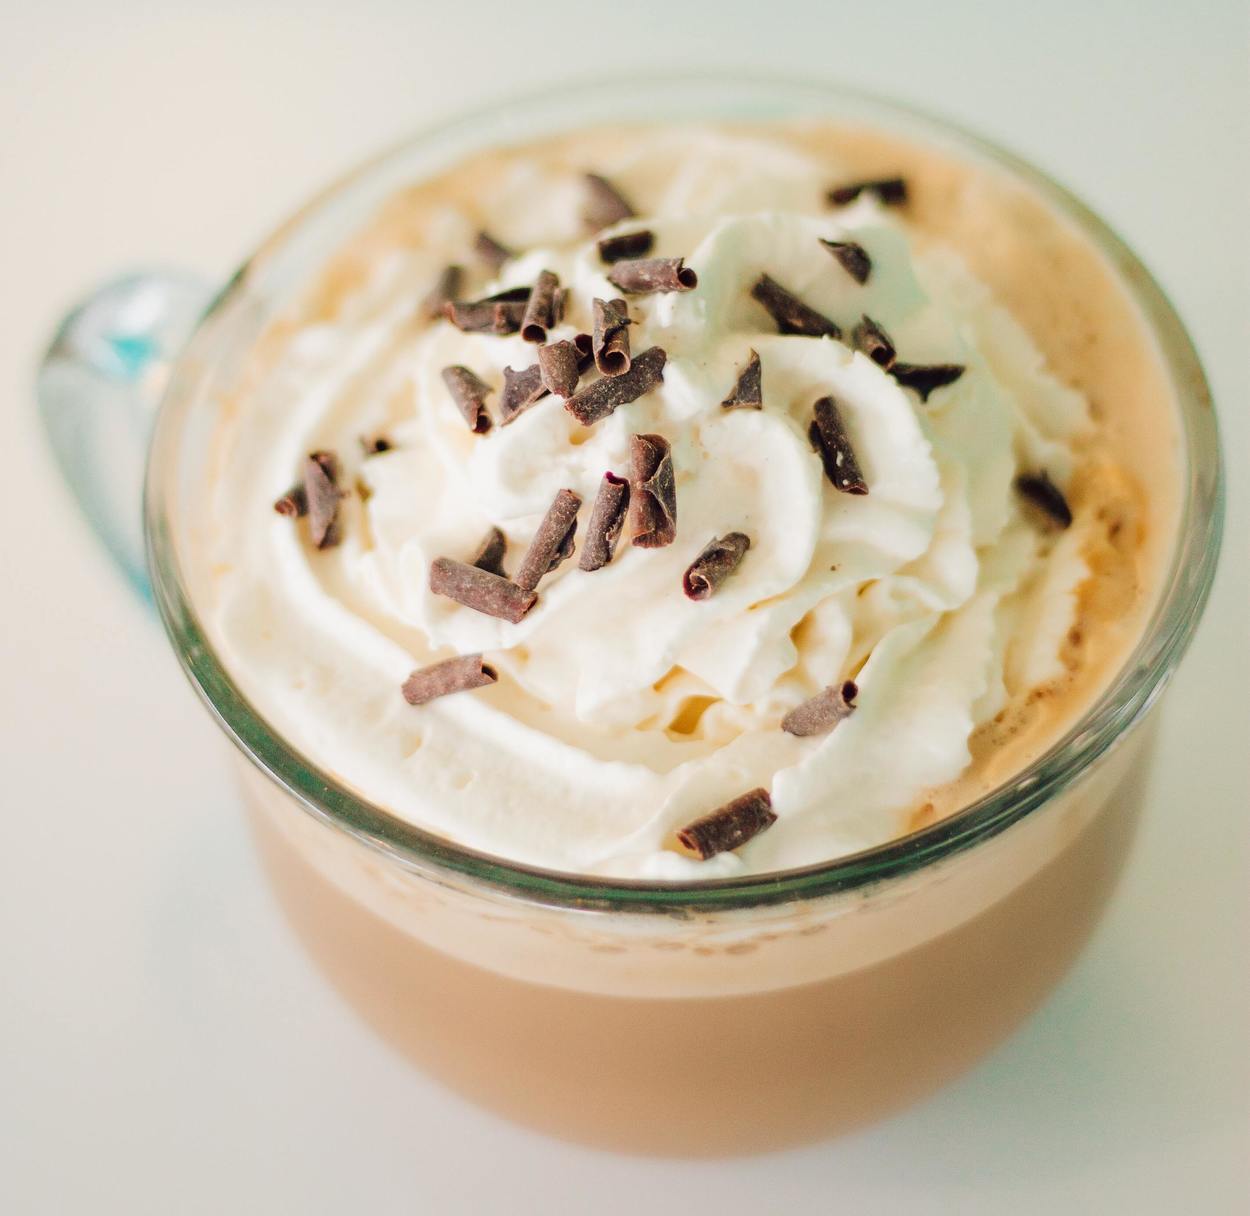 A tempting mug of mocha with whipped cream on top.